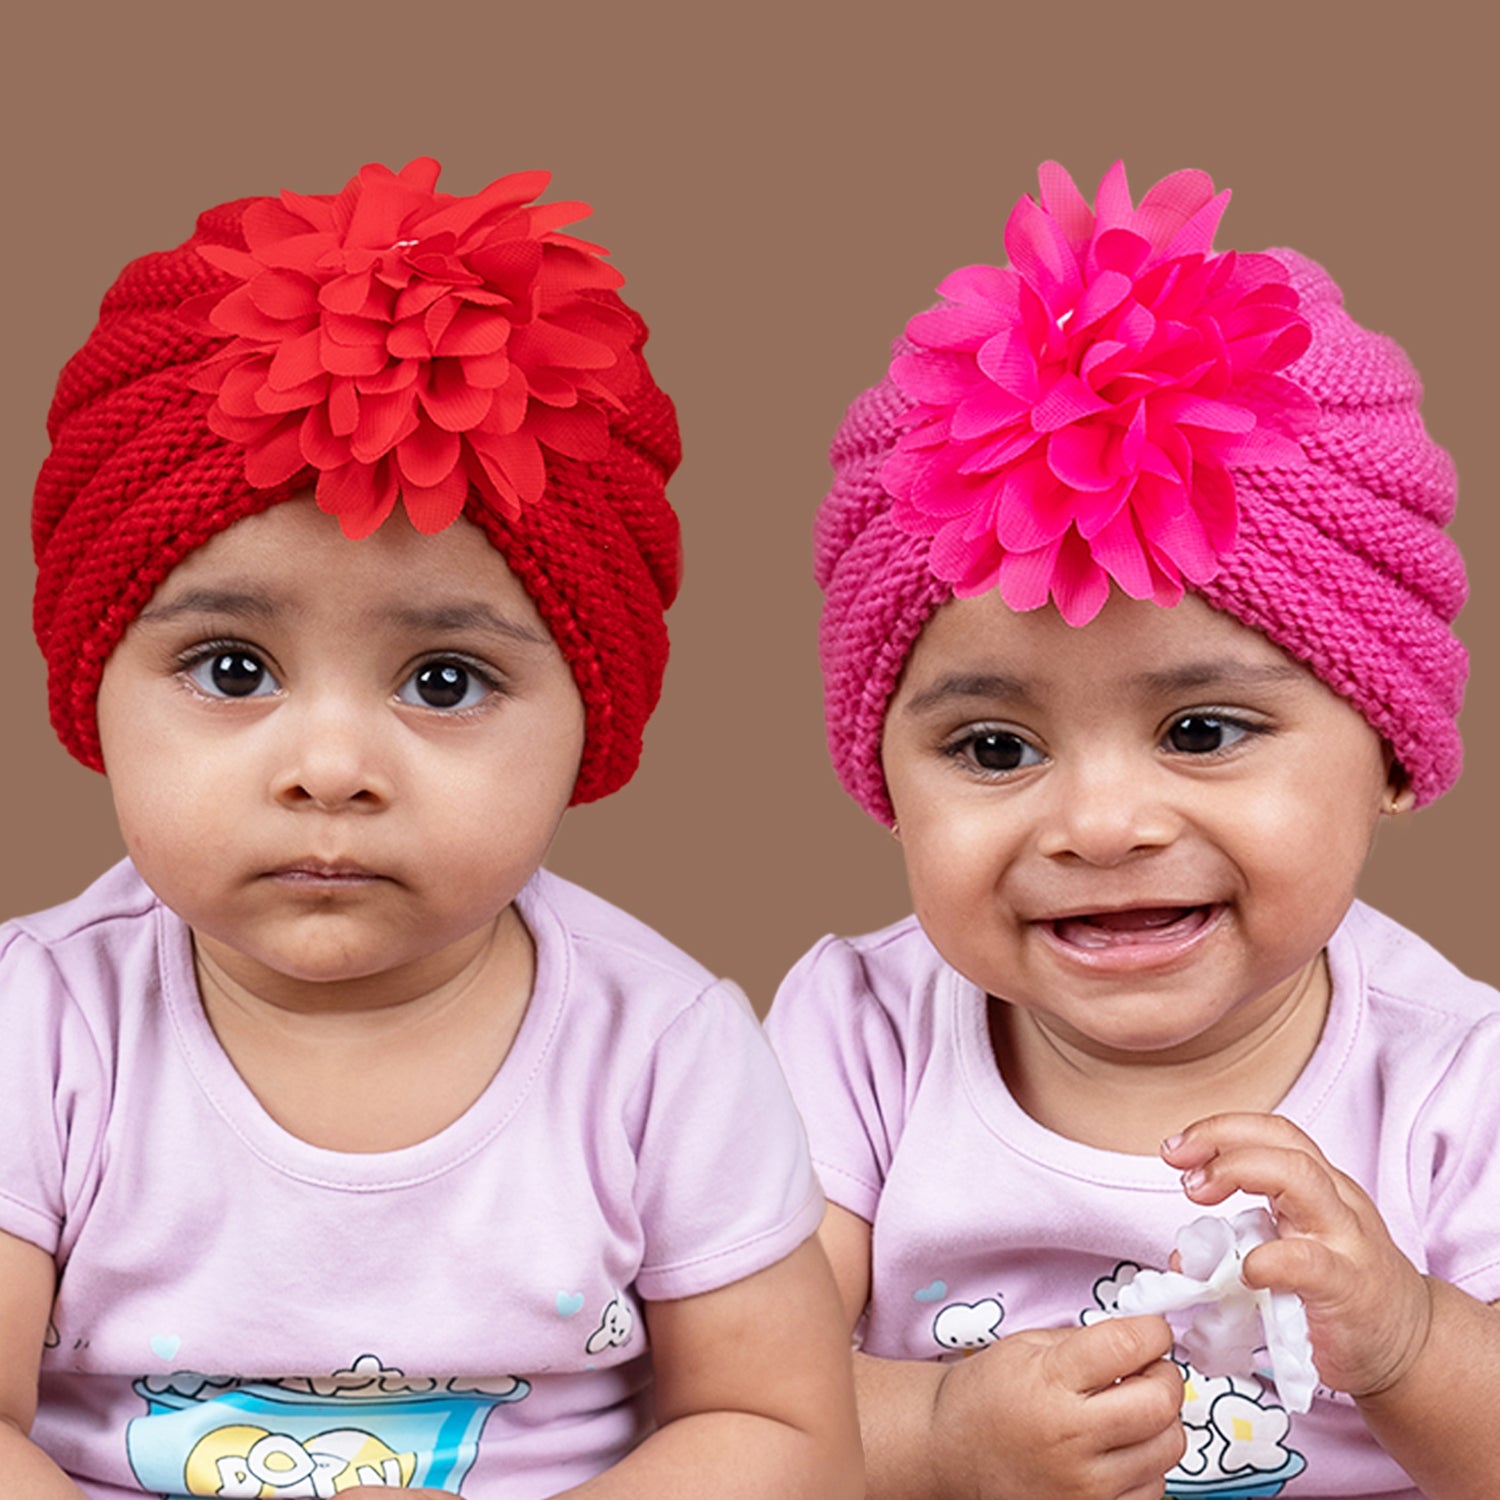 Baby Moo Girls Floral Petals 2 Pack Knitted Turban Caps - Red, Pink